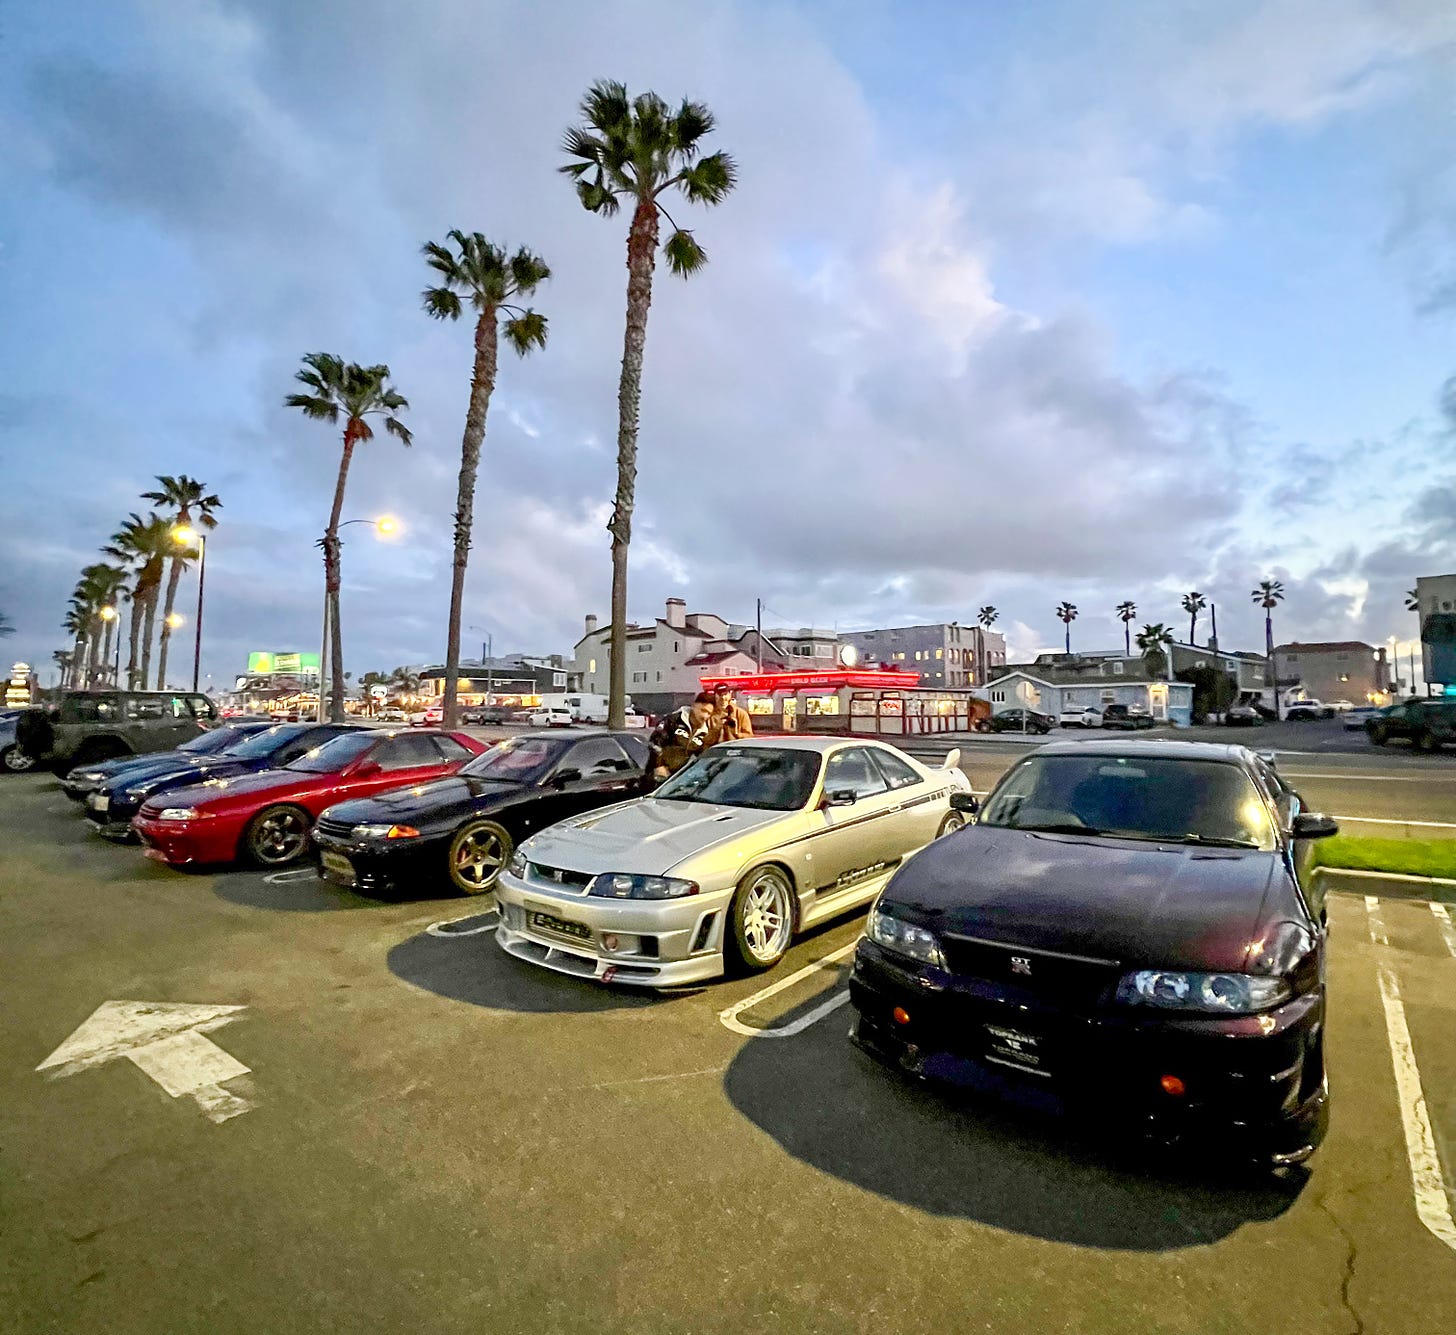 A half-dozen R32 and R33 Skyline GT-R sports cars take up a parking lot in Southern California during sunset with soft streetlights making them glow and palm trees towering overhead.